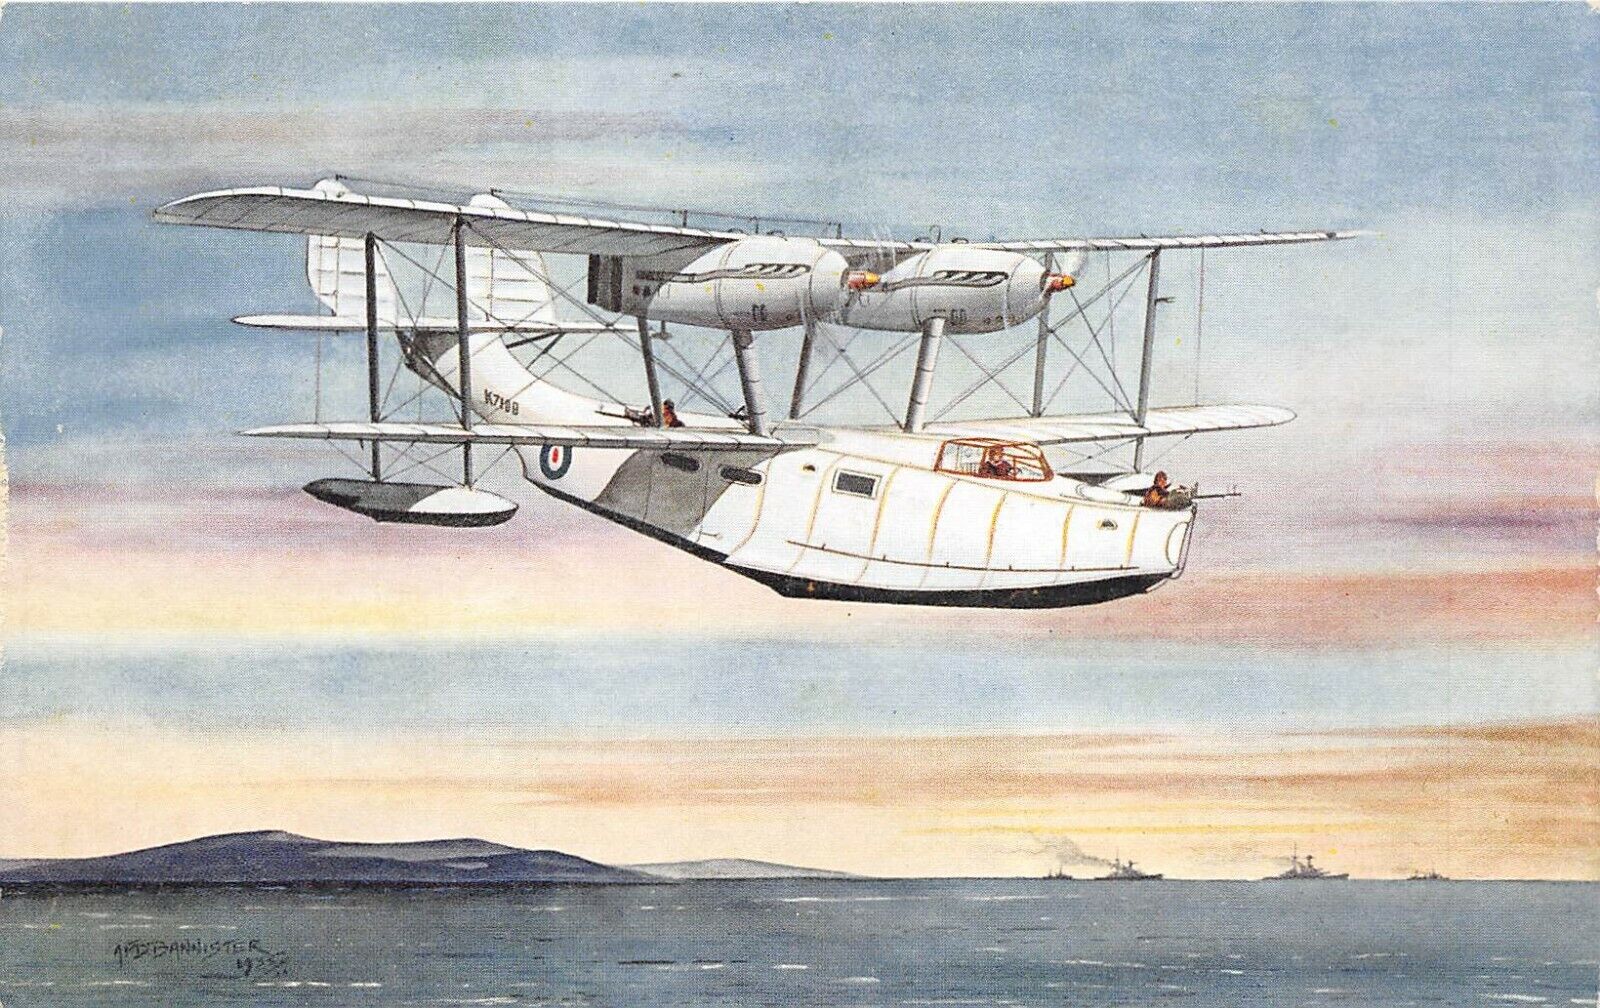 Vickers-Supermarine Scapa Reconnaissance Flying Boat Airplane c1935 Postcard